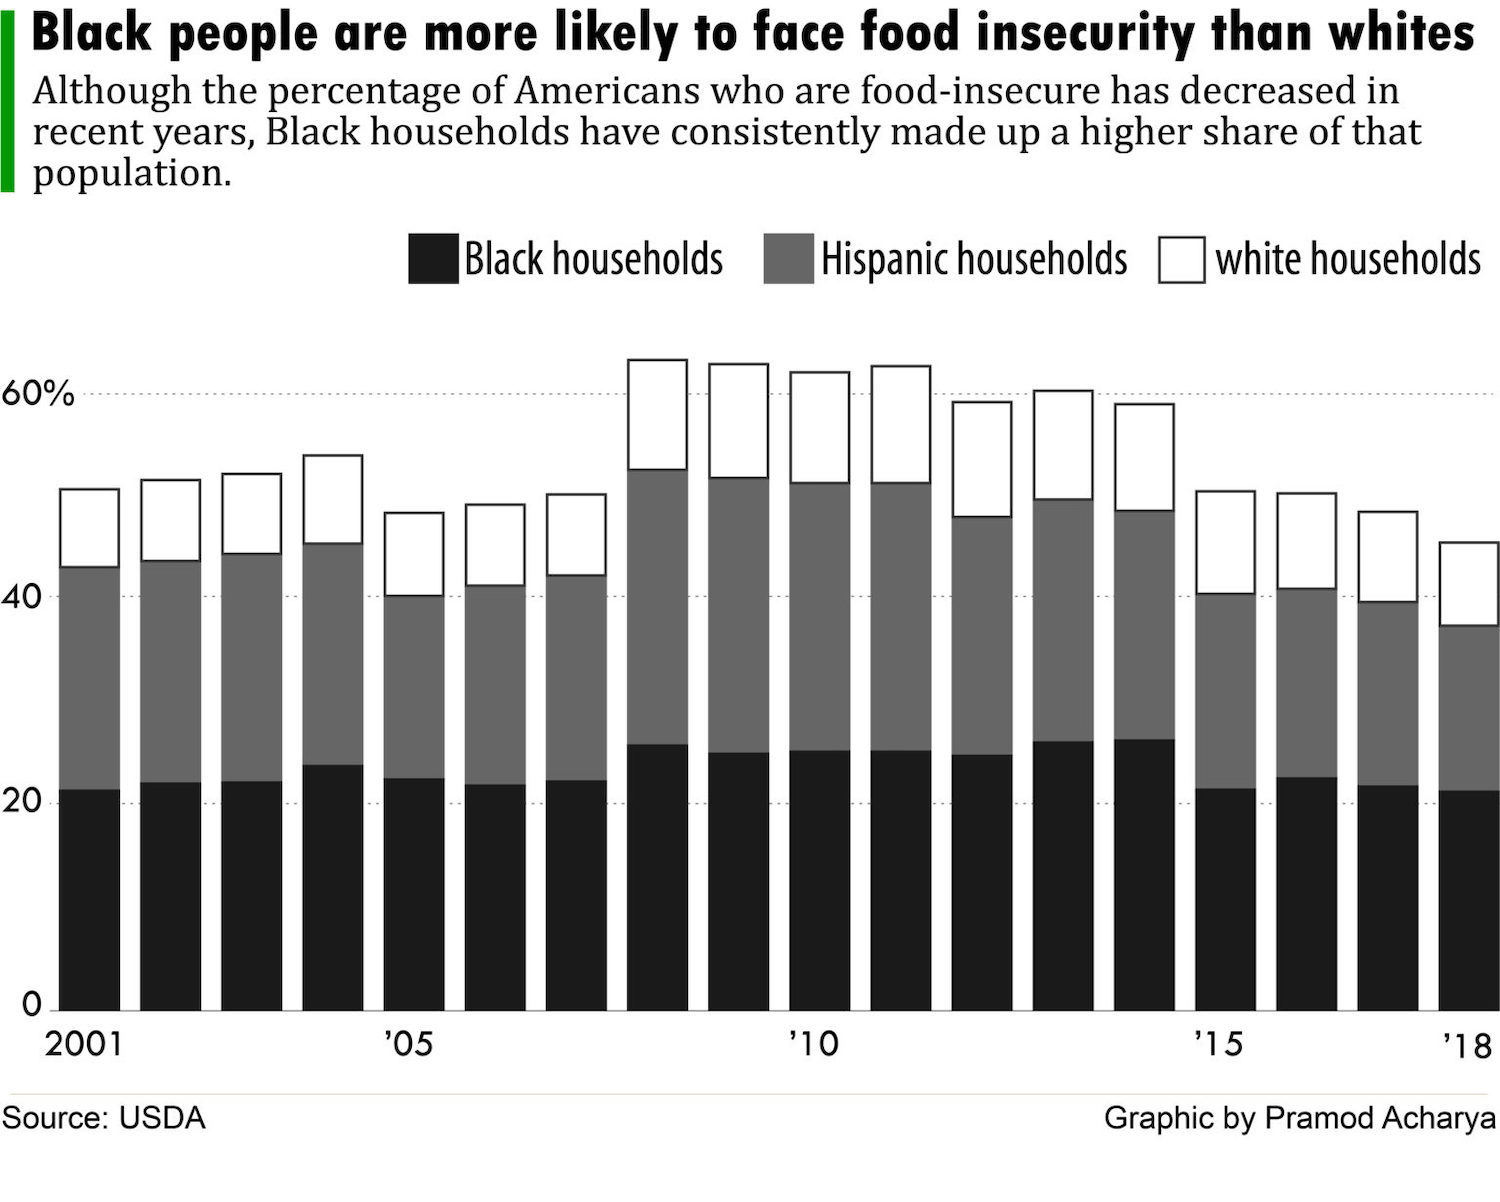 Black people are more likely to face food insecurity than white people September 2020